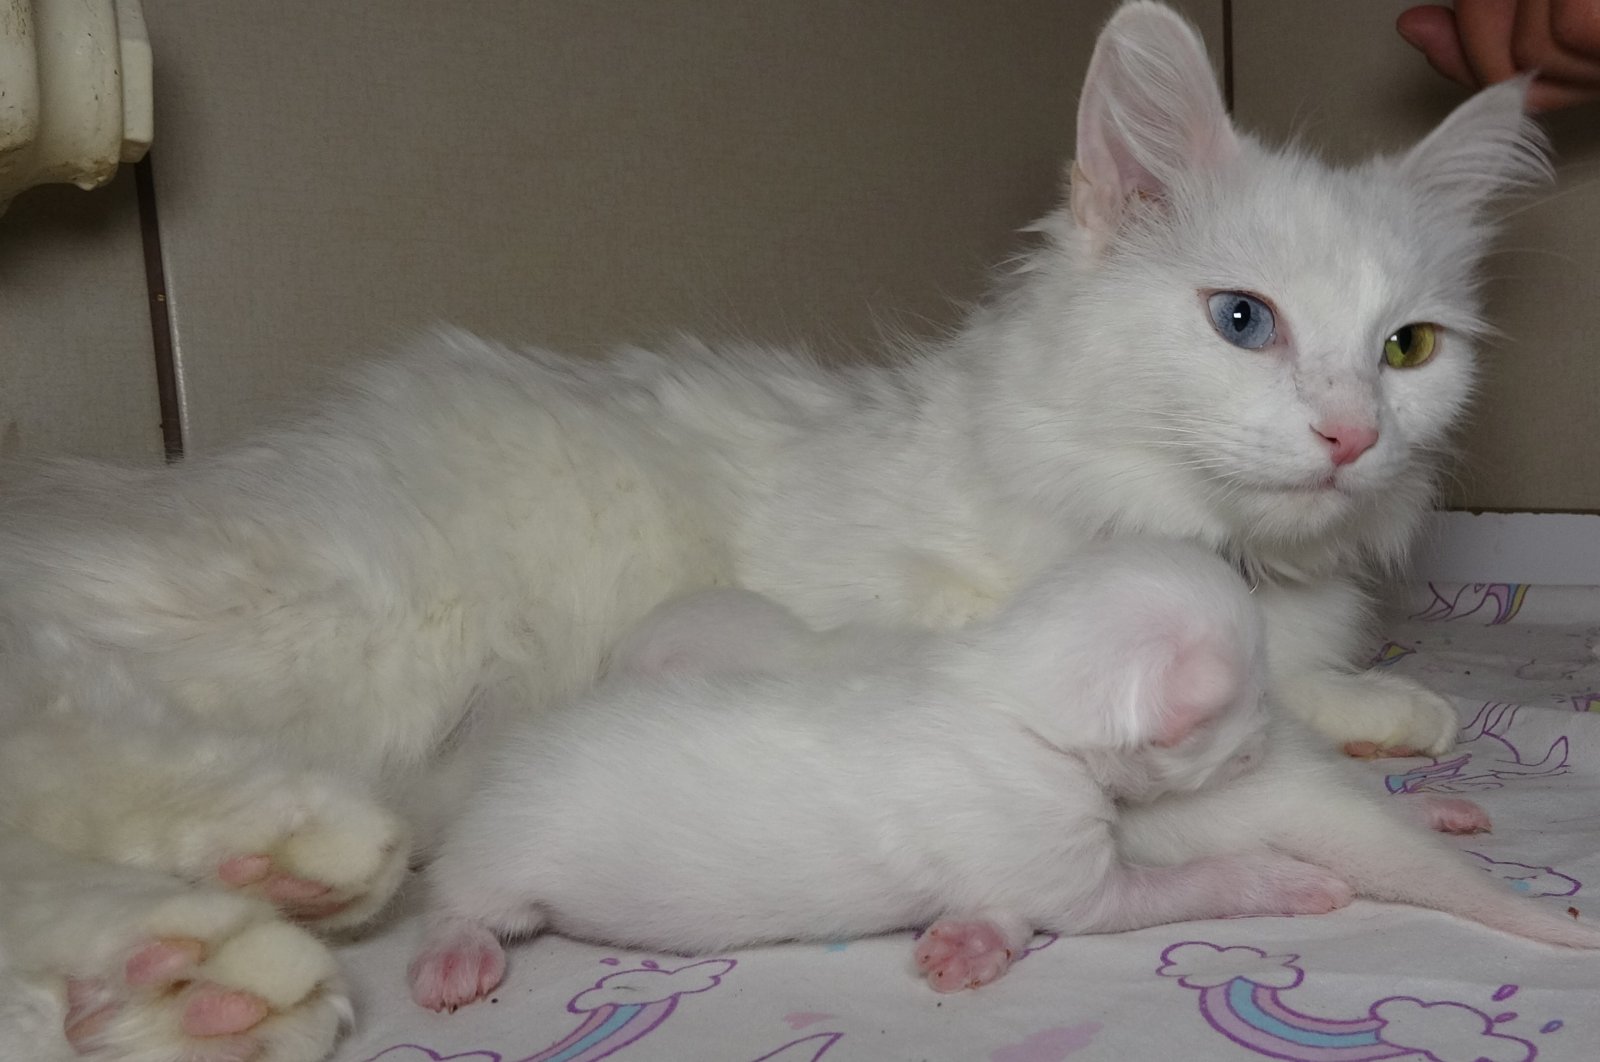 The cat named &quot;Mia,&quot; who won the &quot;Van Cat Beauty Contest&quot; held in 2022 and has previously given birth twice, has also given birth to two beautiful kittens this year, Van, Türkiye, April 17, 2023. (IHA Photo)